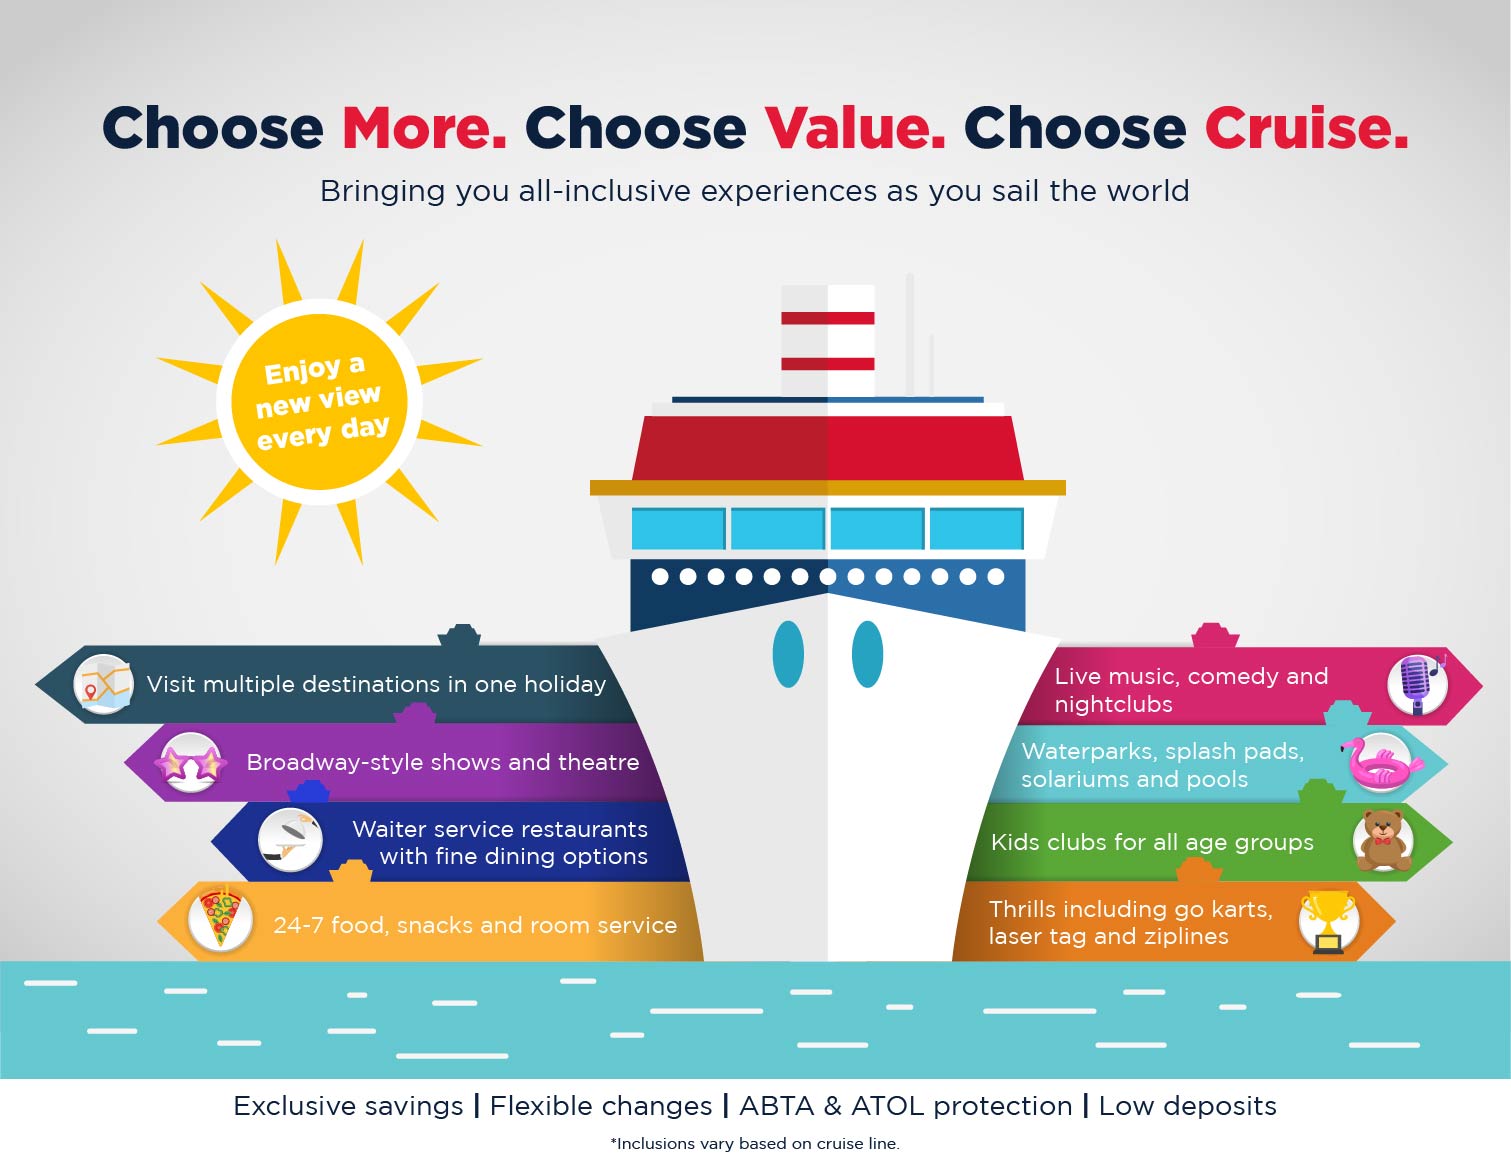 Choose Cruise For Value